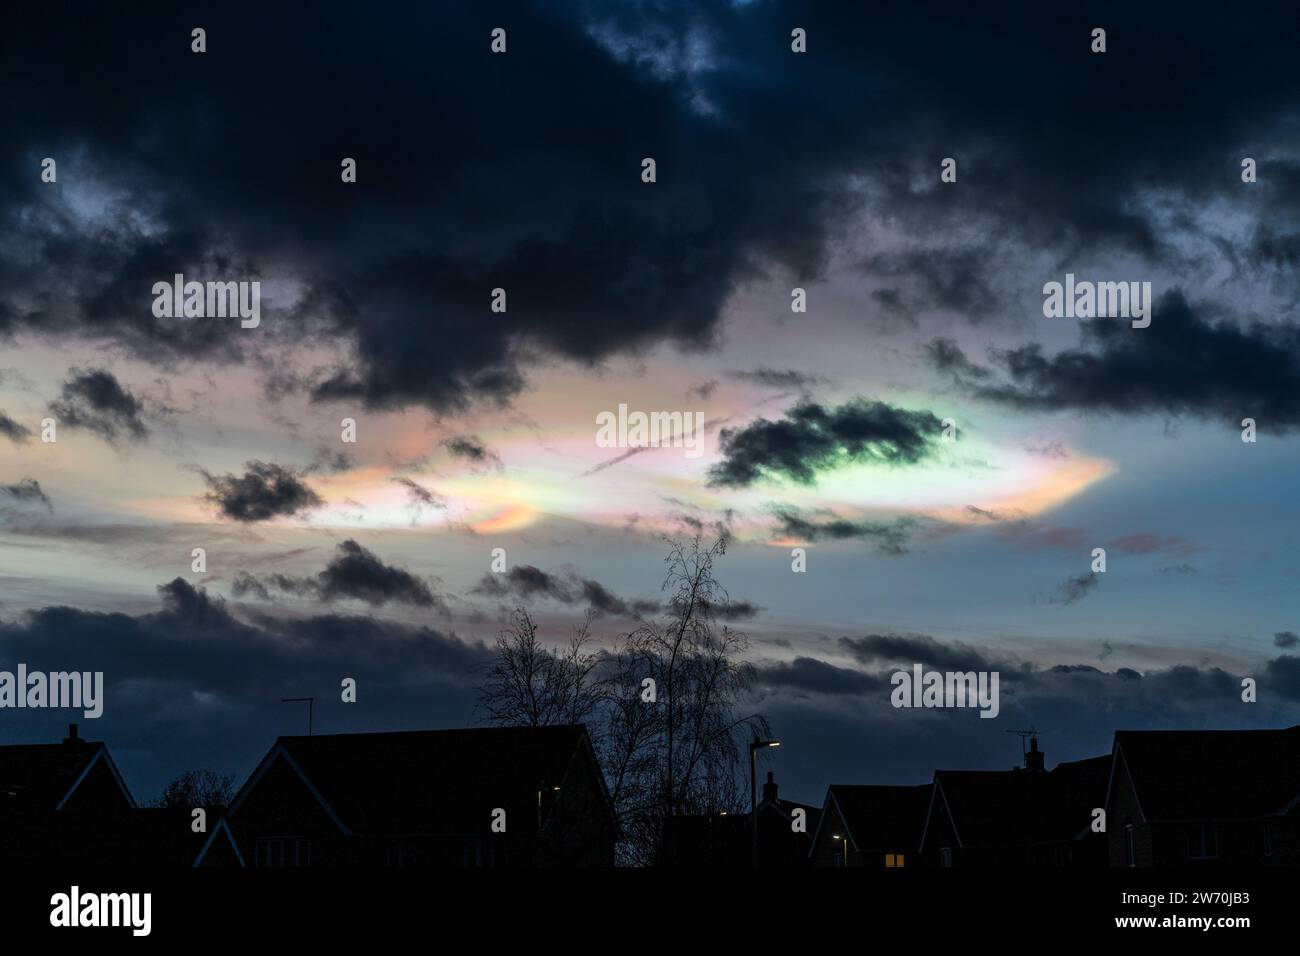 Nacreous, or mother of pearl, clouds over South East England. High up in the stratosphere, these polar iridescent clouds reflect the sun light the setting sun usually at that point is below the horizon. They are very rarely over England being mainly displaced polar air from the Artic circle. Stock Photo